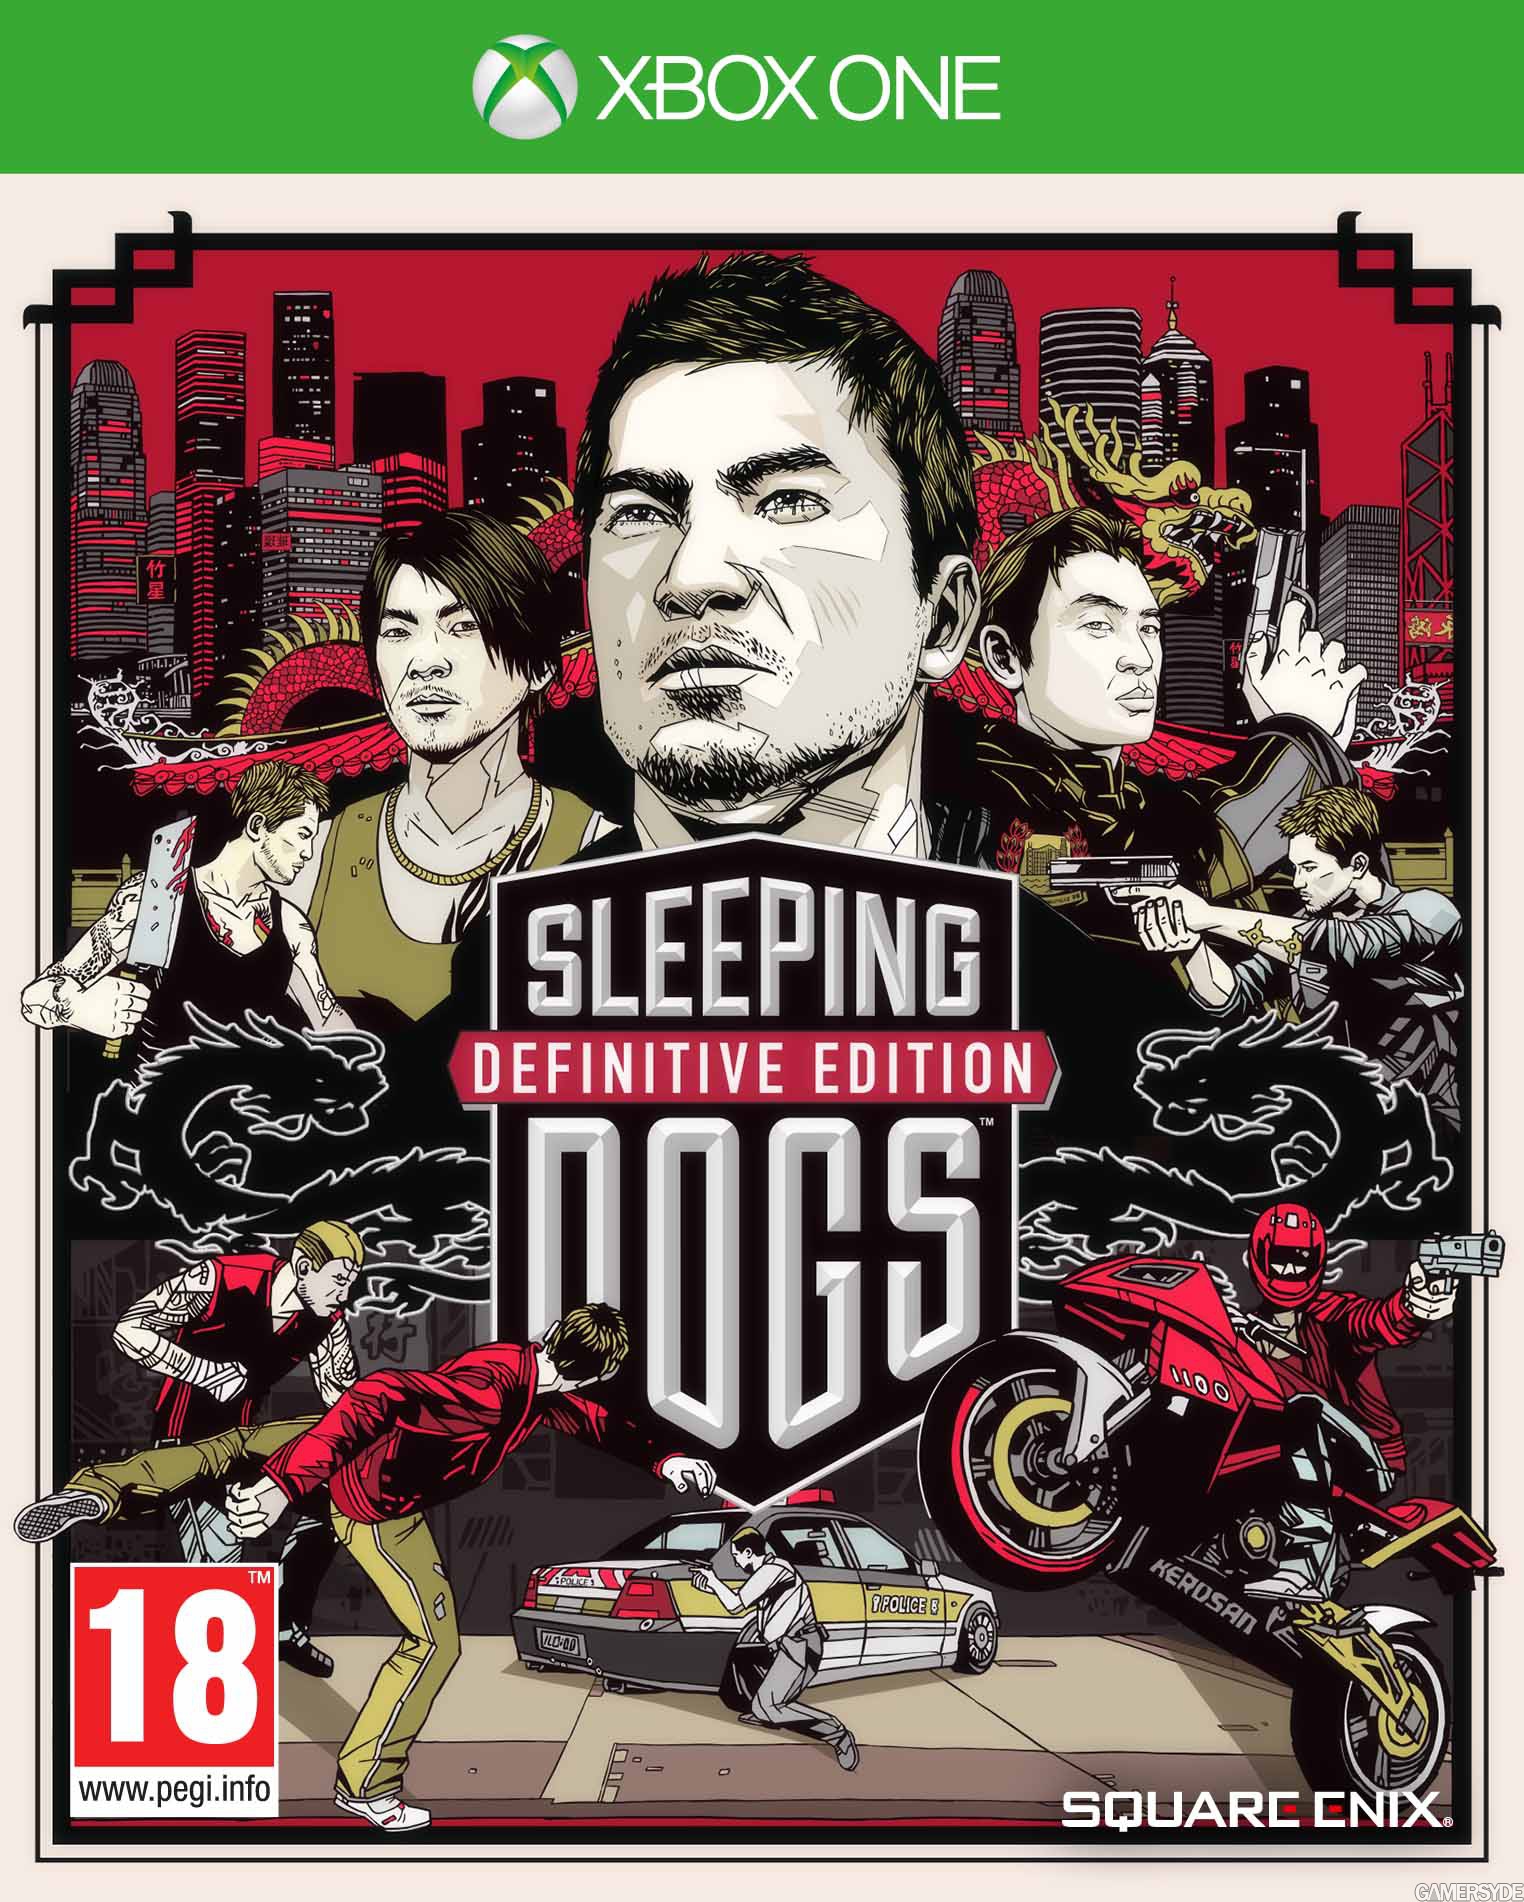 Sleeping Dogs Definitive Edition Gamersyde